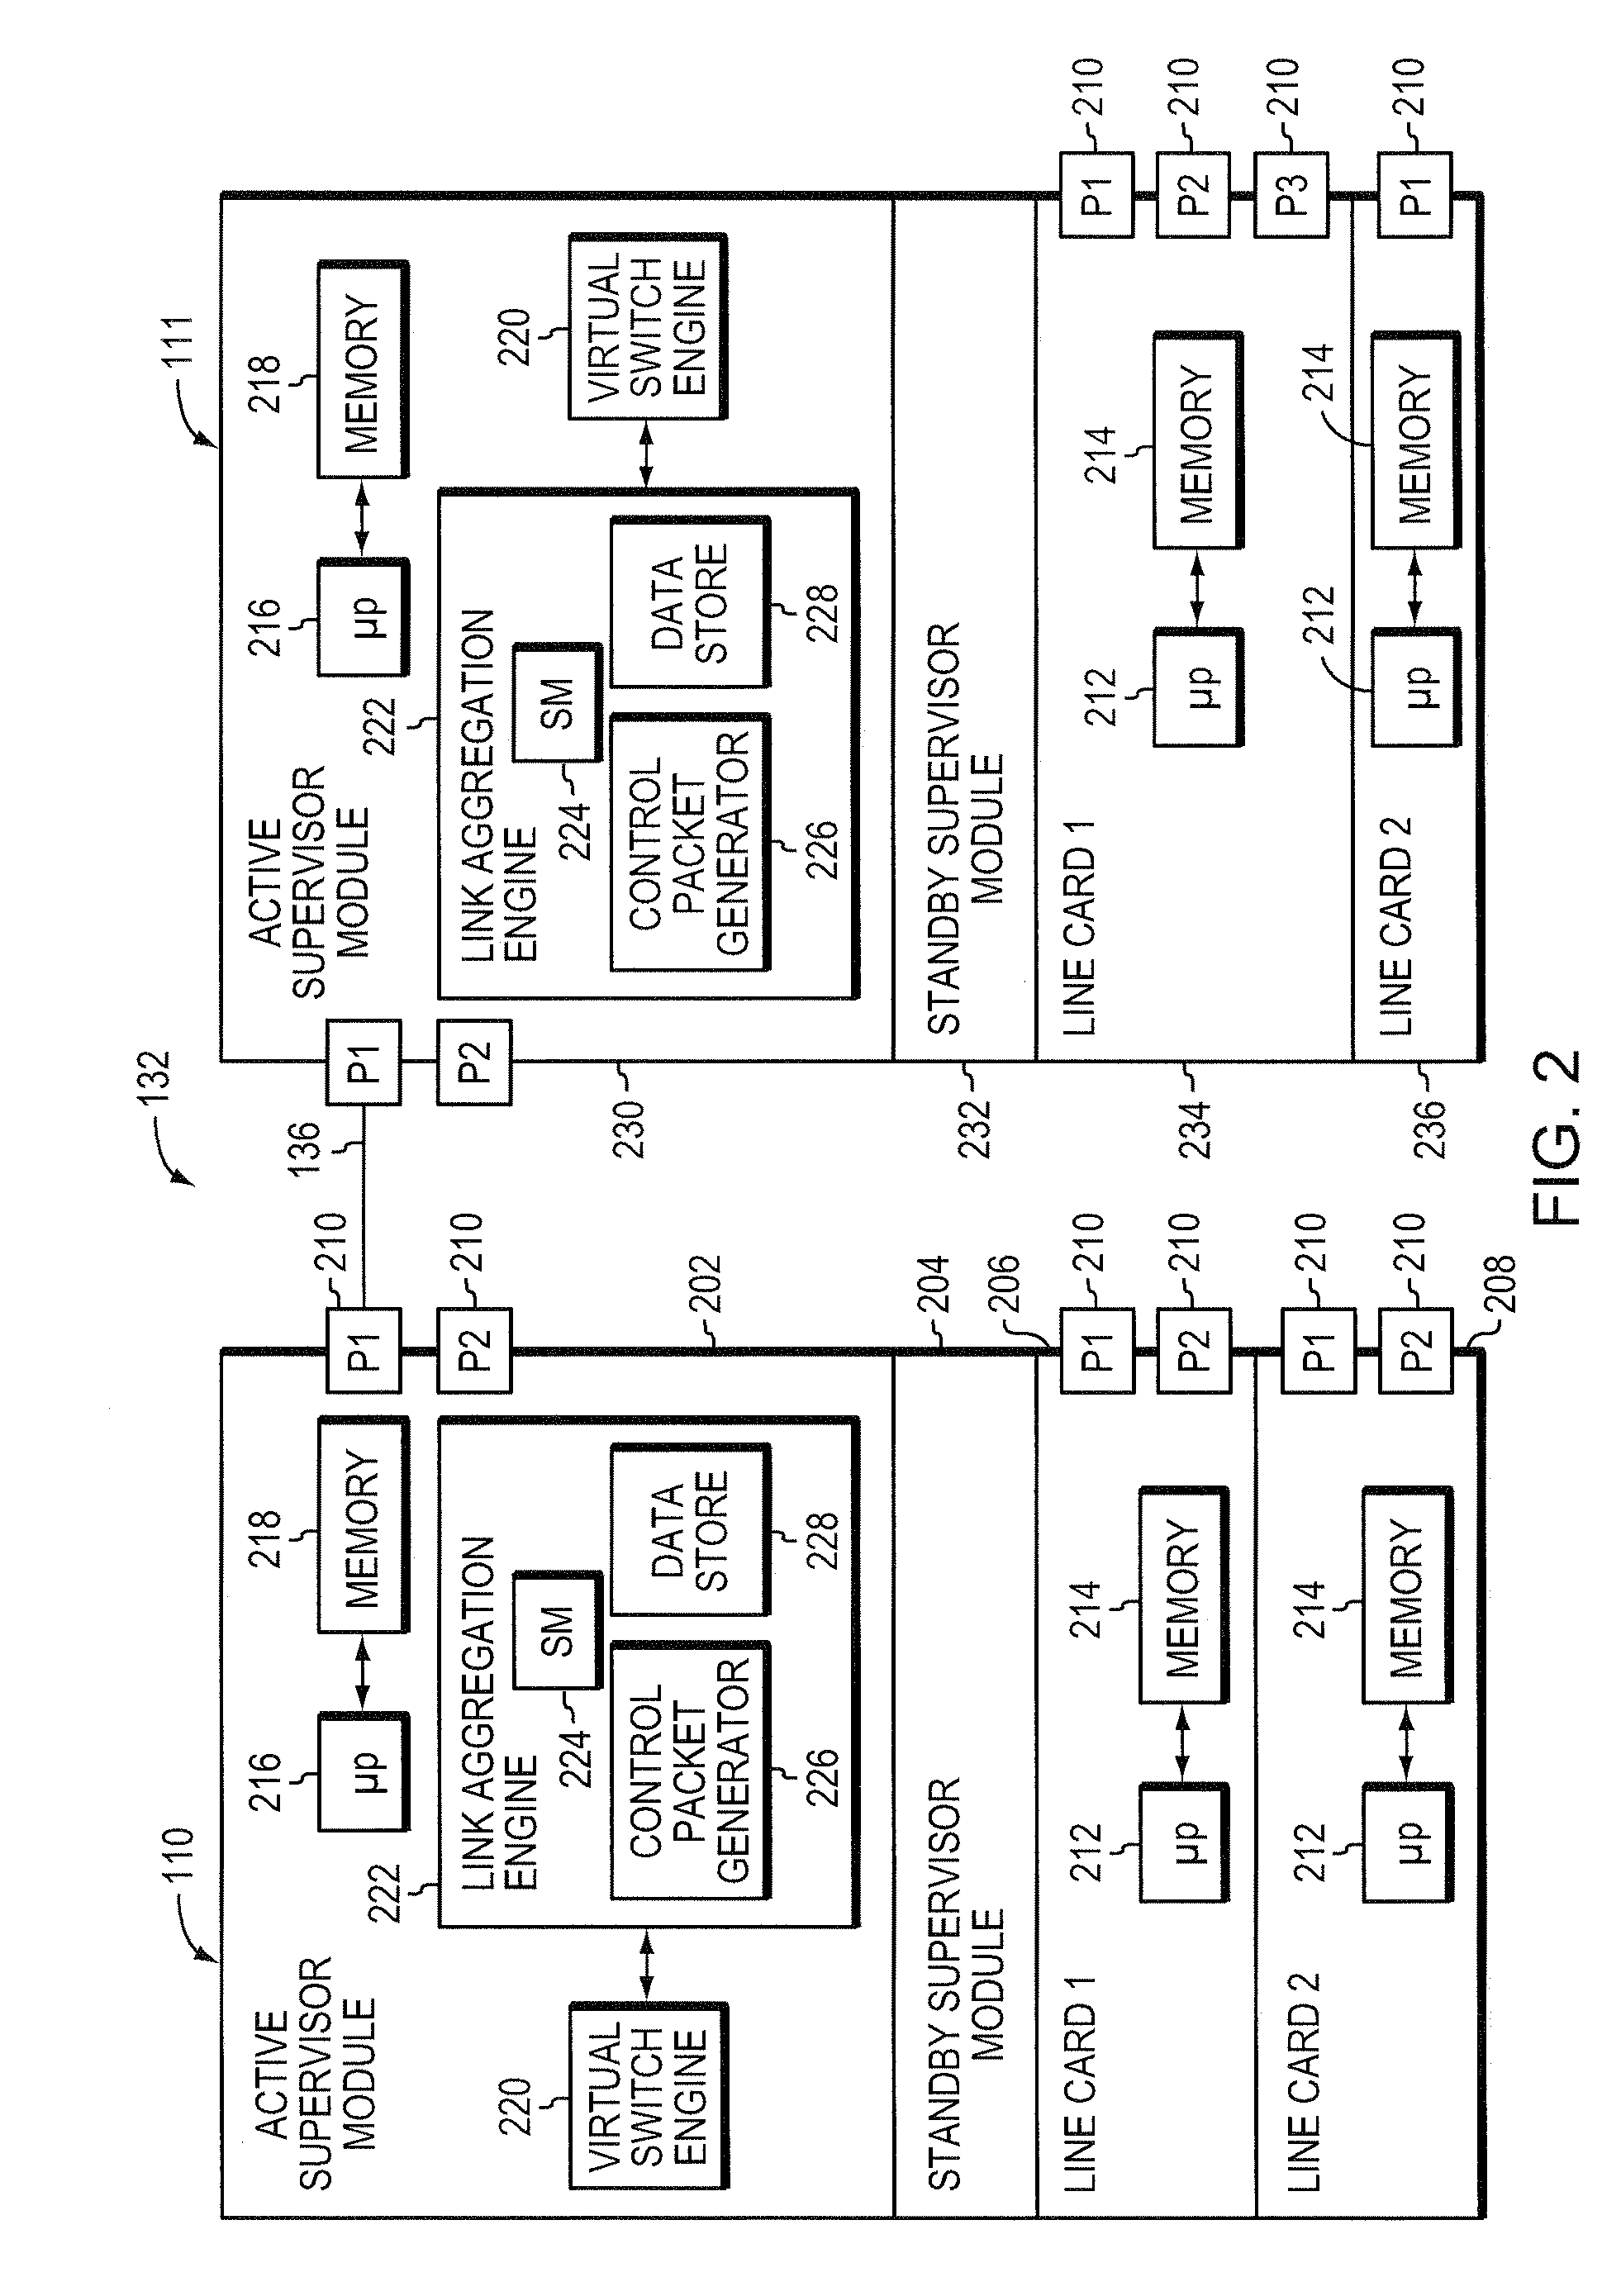 System and method for detecting and recovering from virtual switch link failures